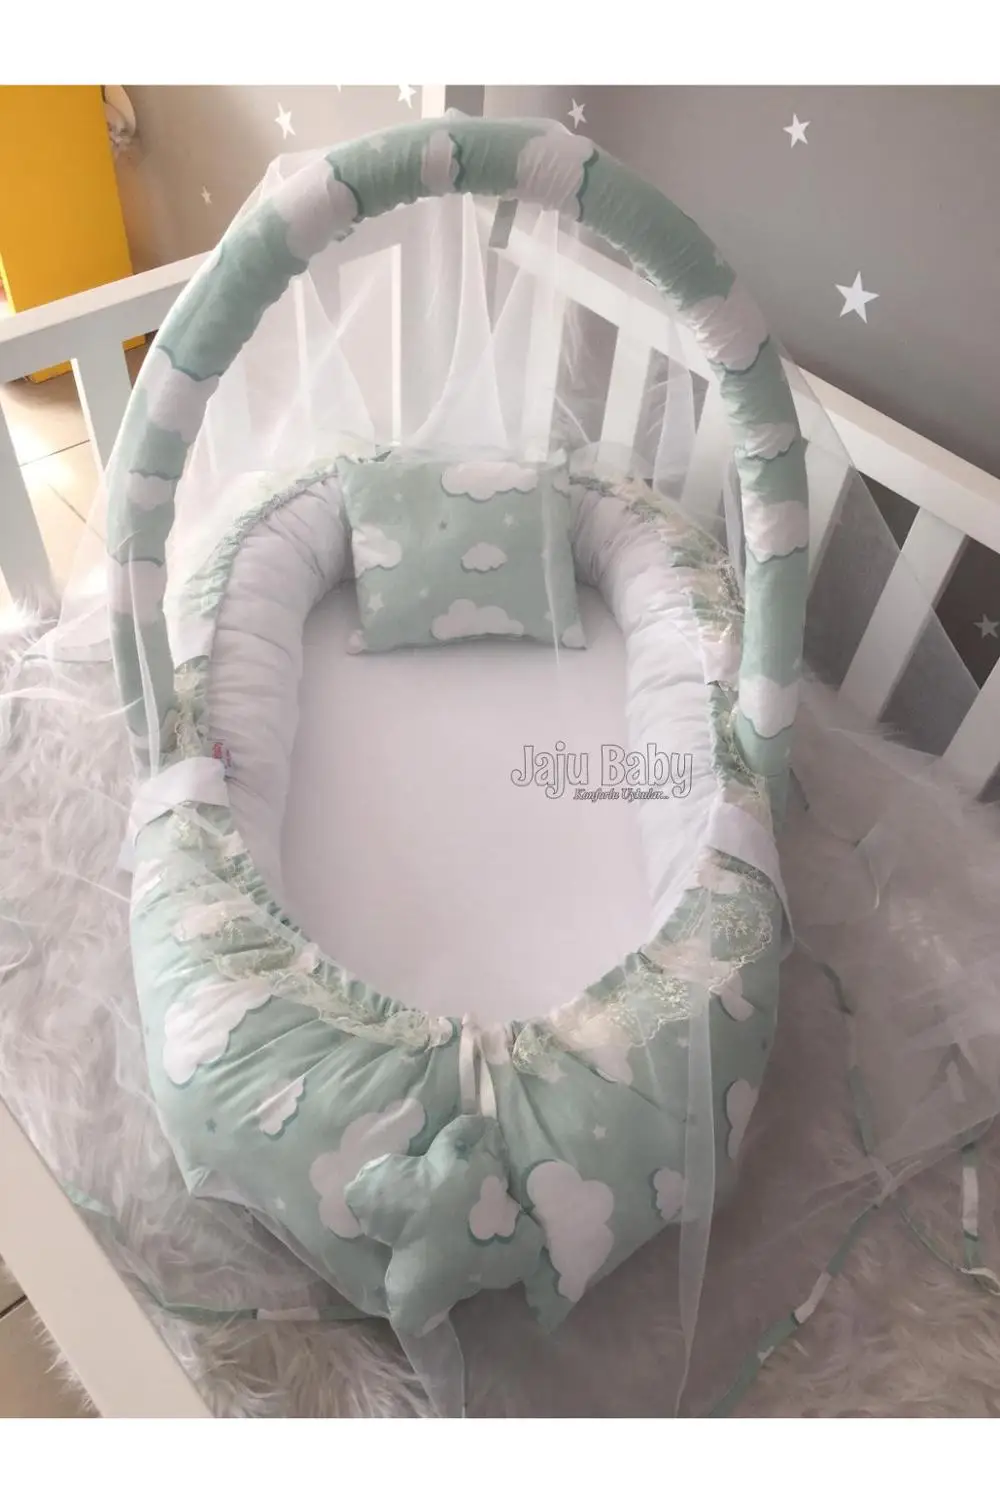 Jaju Baby Handmade Green Cloud Patterned Mosquito Net and Toy Apparatus Luxury Design Babynest Mother Side Portable Baby Bed